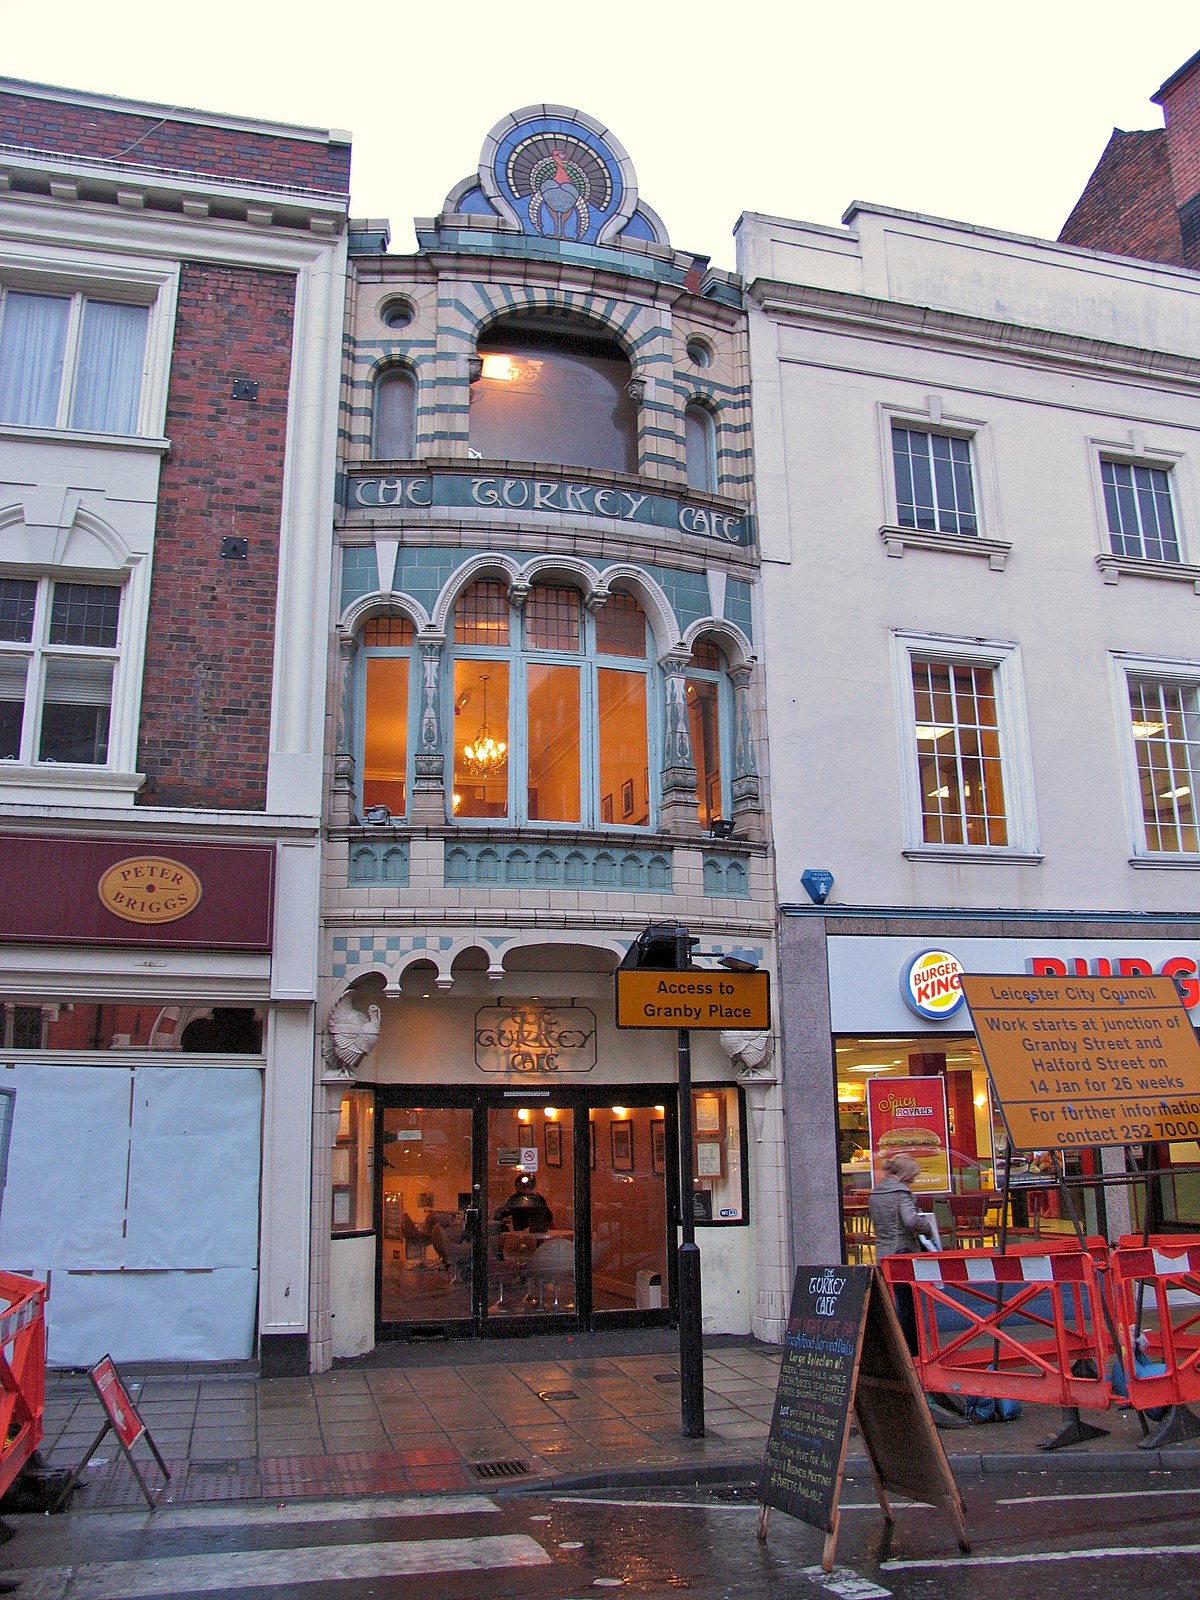 https://upload.wikimedia.org/wikipedia/commons/thumb/e/ec/B%C3%A2timent_Art_Nouveau_%C3%A0_Leicester.jpg/1200px-B%C3%A2timent_Art_Nouveau_%C3%A0_Leicester.jpg